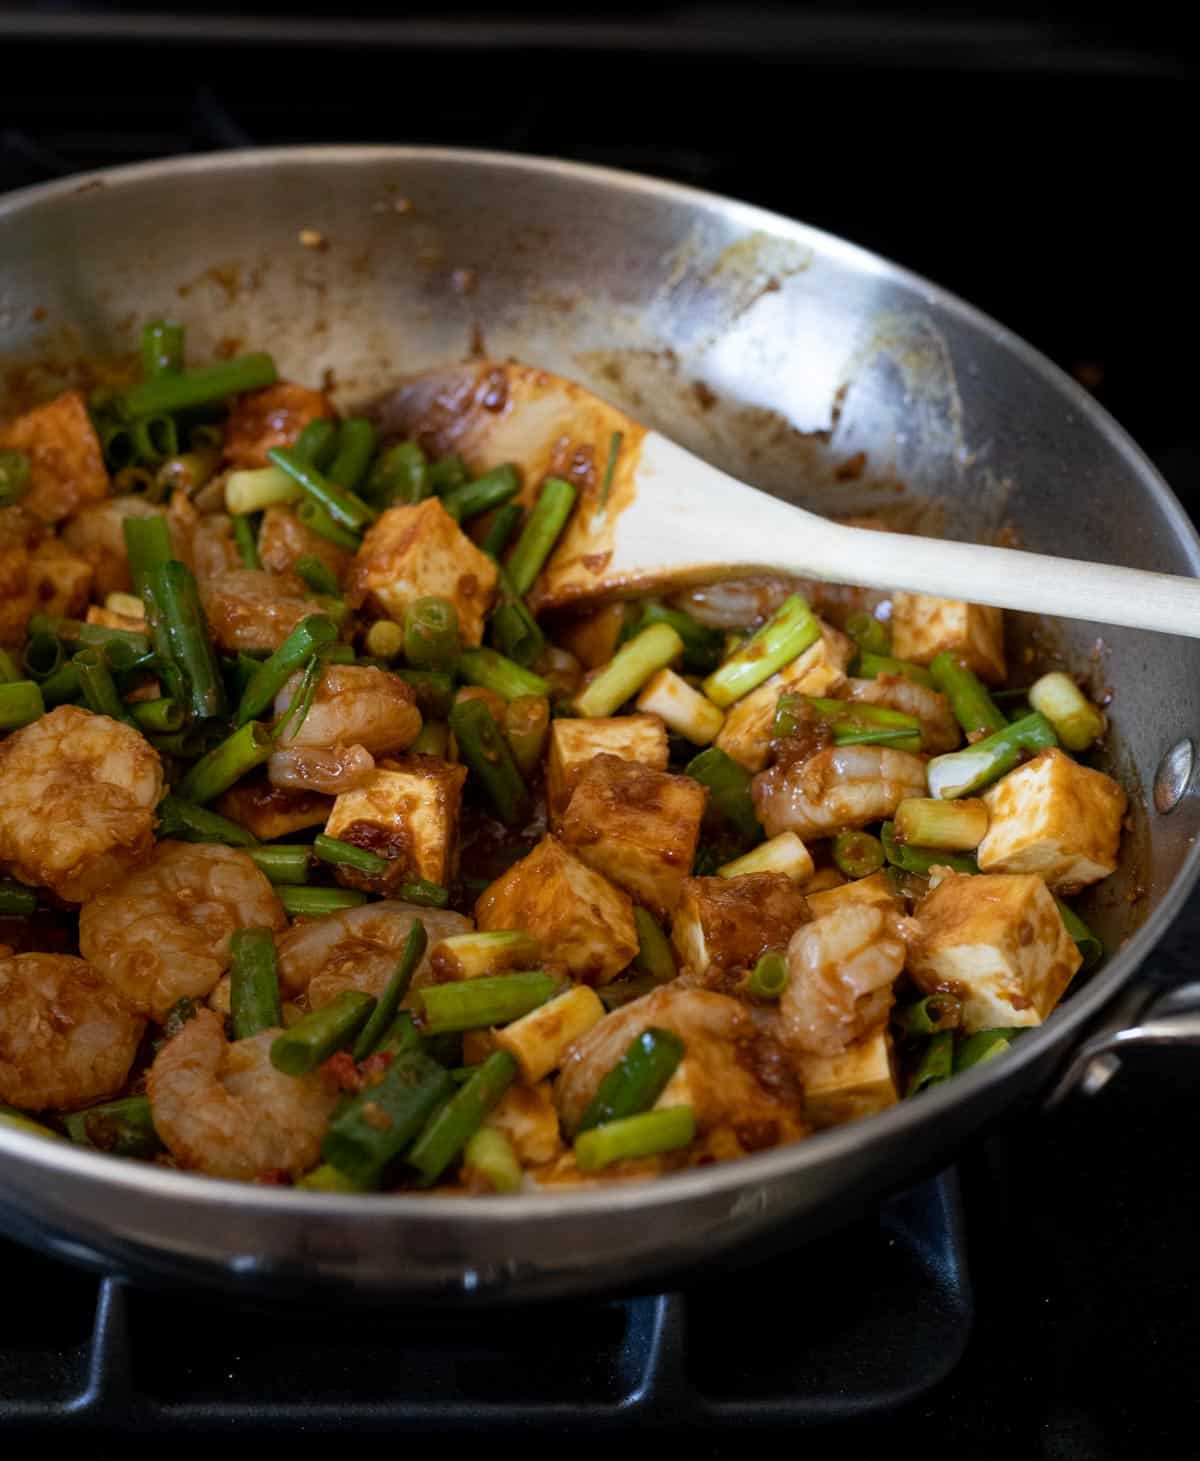 Green onions added to the skillet with the shrimp and tofu.